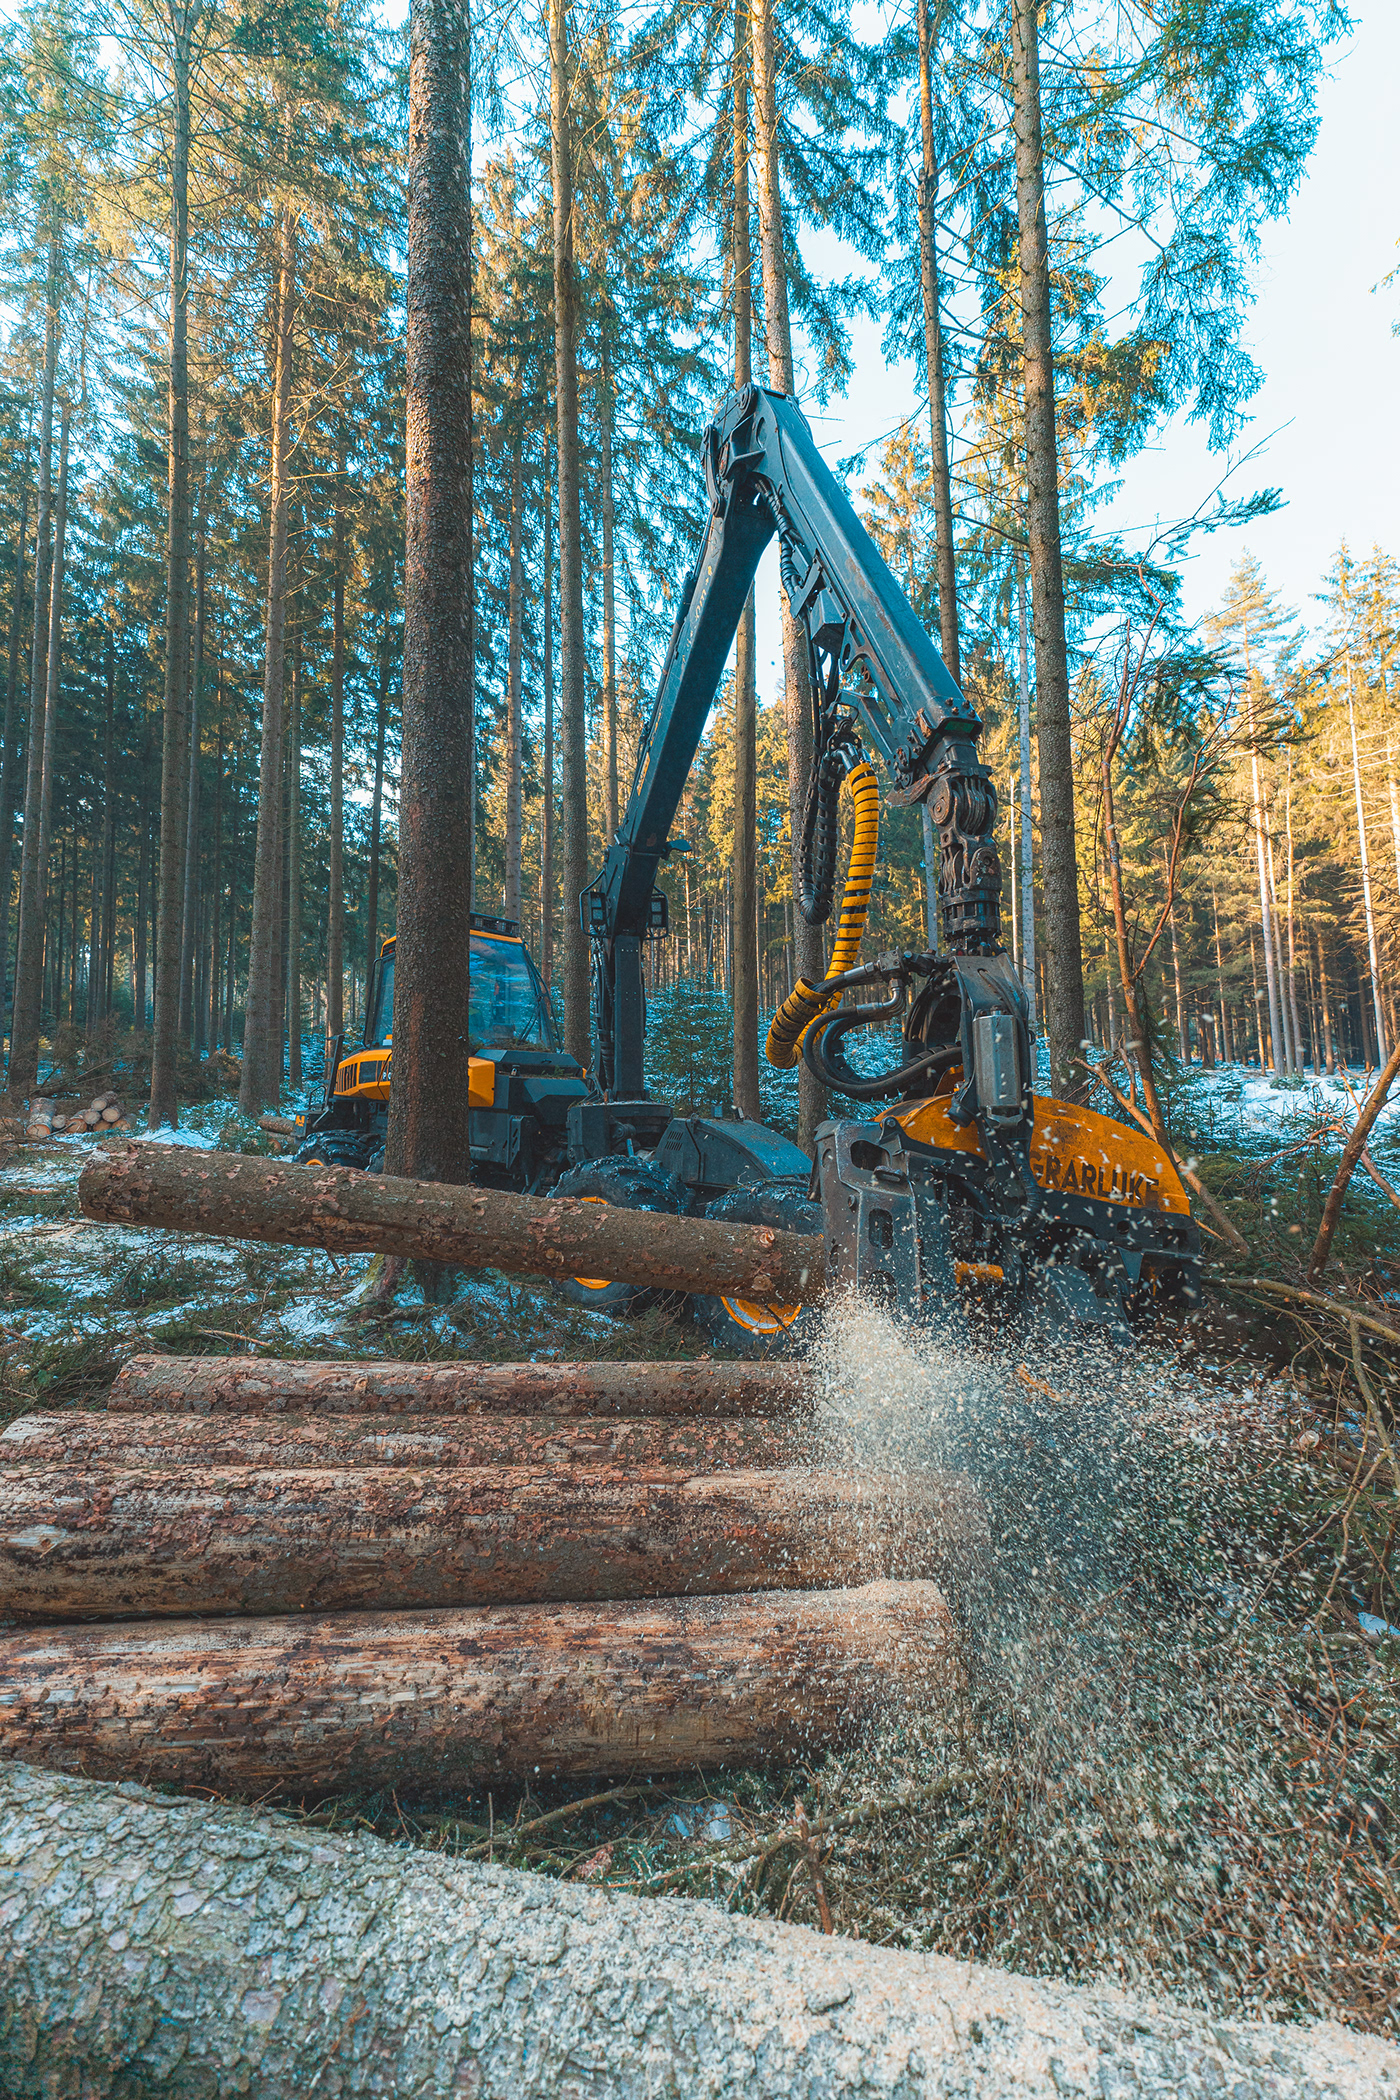 forest forestry harvester machinery Ponsse